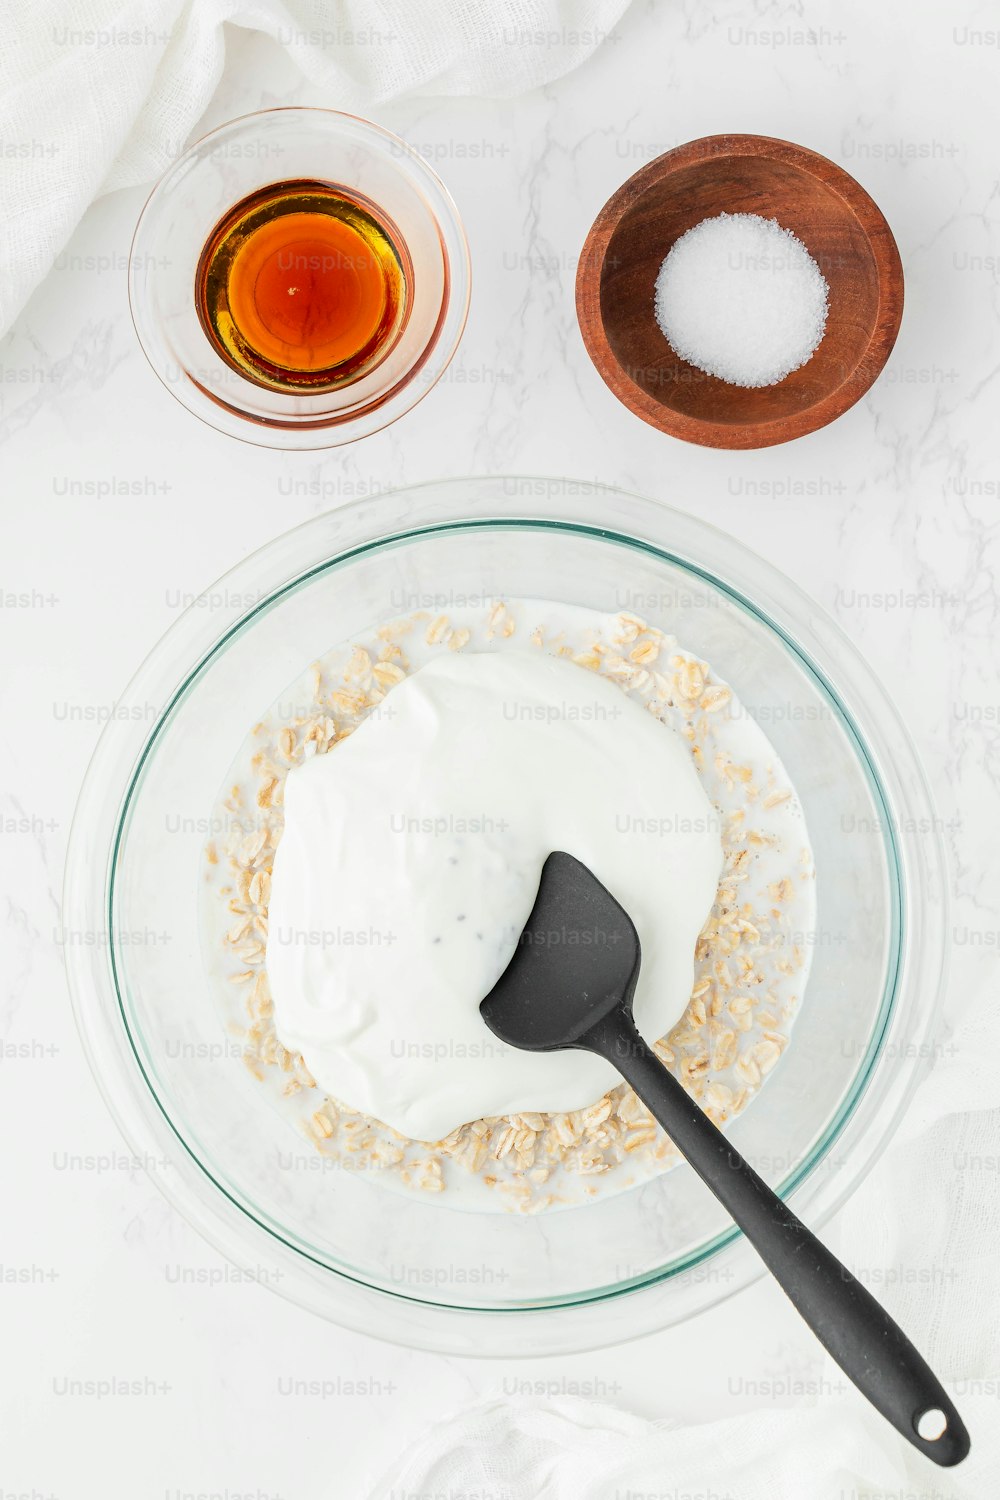 a bowl of yogurt and a spoon on a table